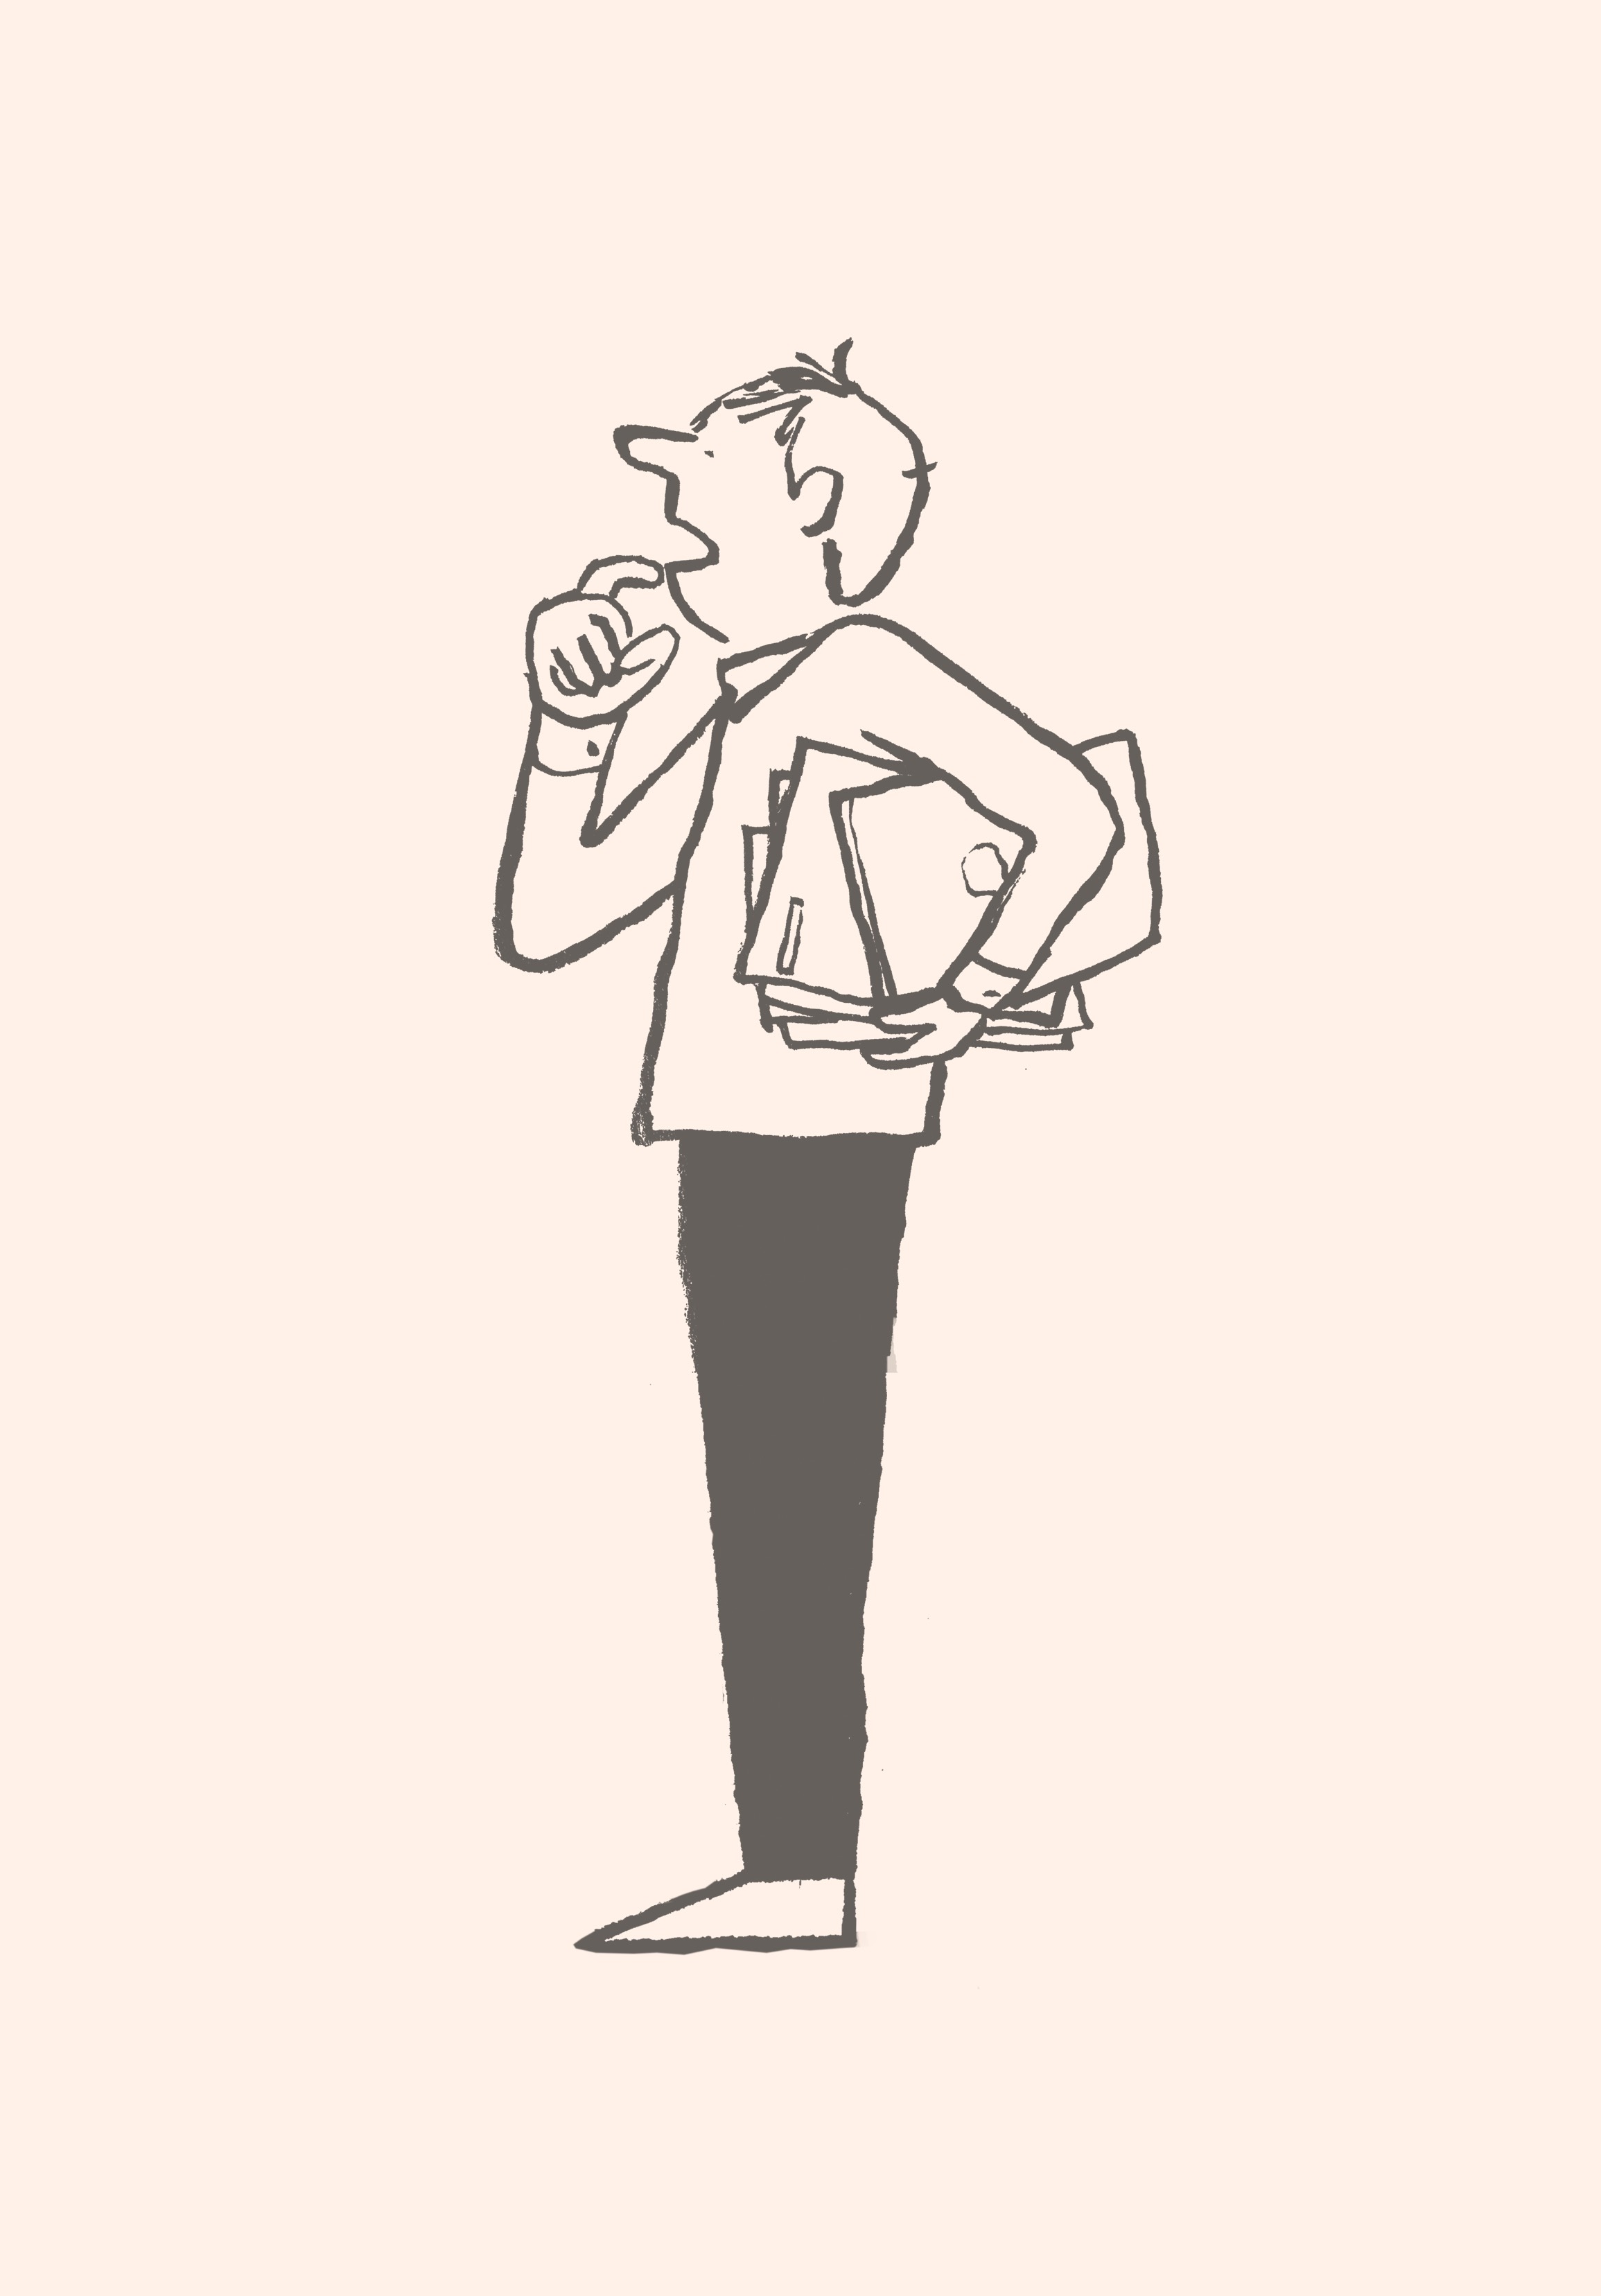 A cartoon of a man holding meeting materials and looking perplexed.